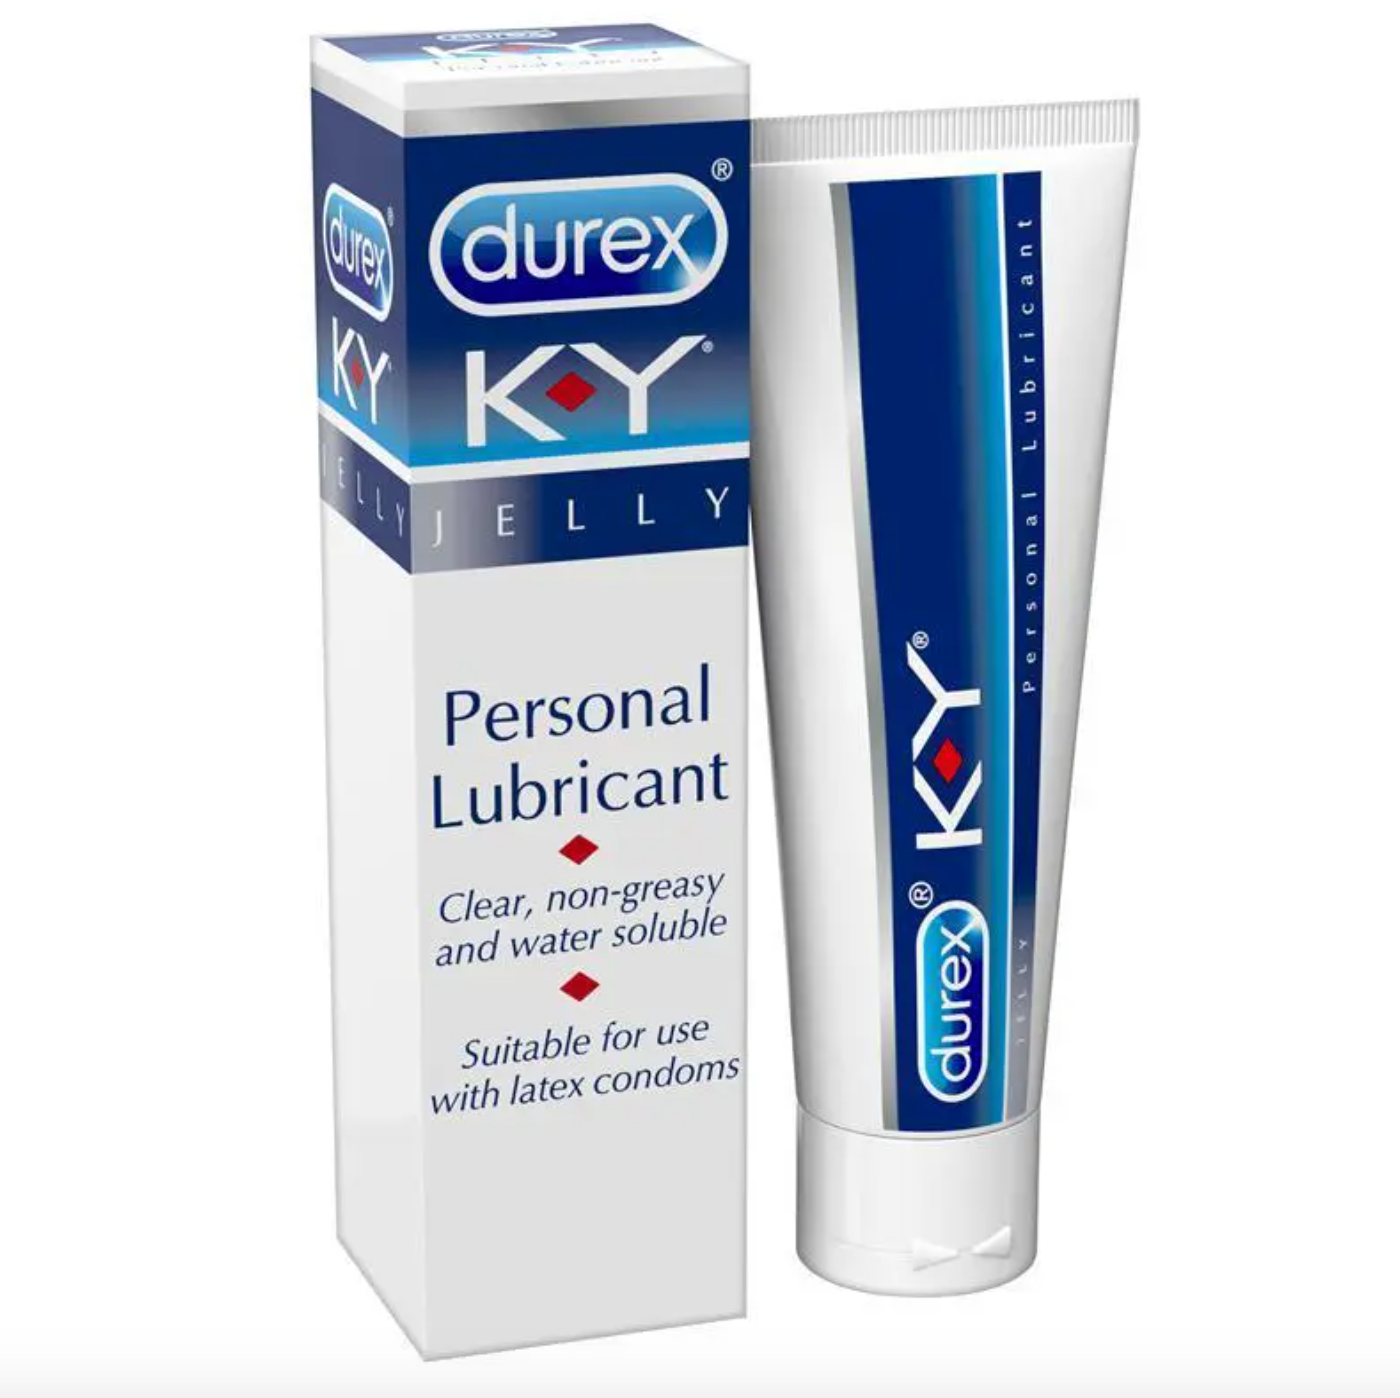 K-Y Brand Jelly Personal Lubricant - 50g